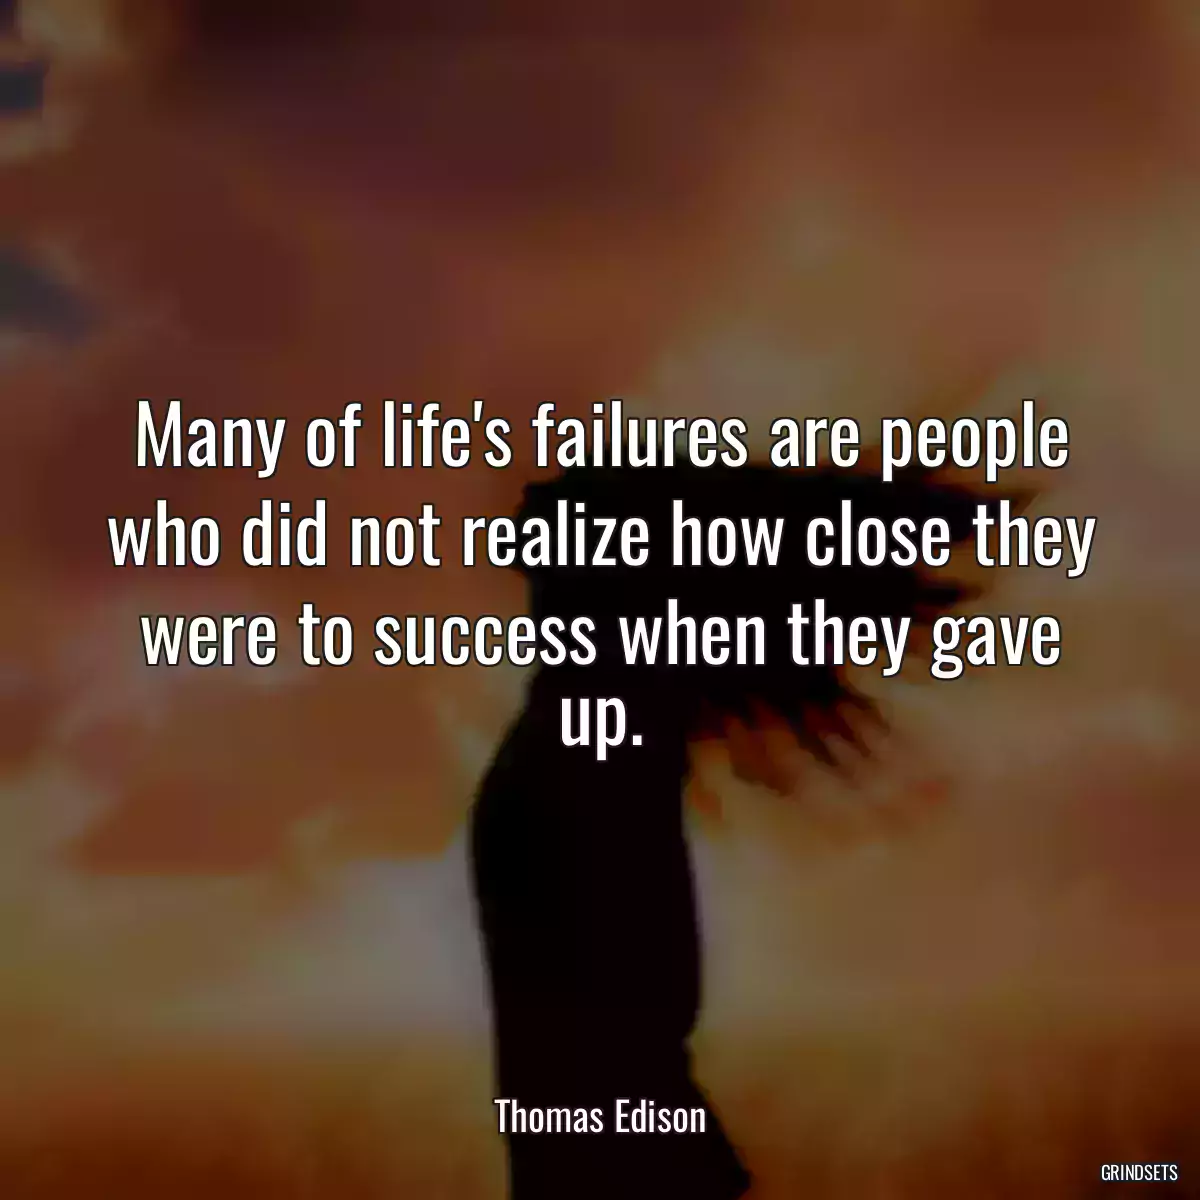 Many of life\'s failures are people who did not realize how close they were to success when they gave up.